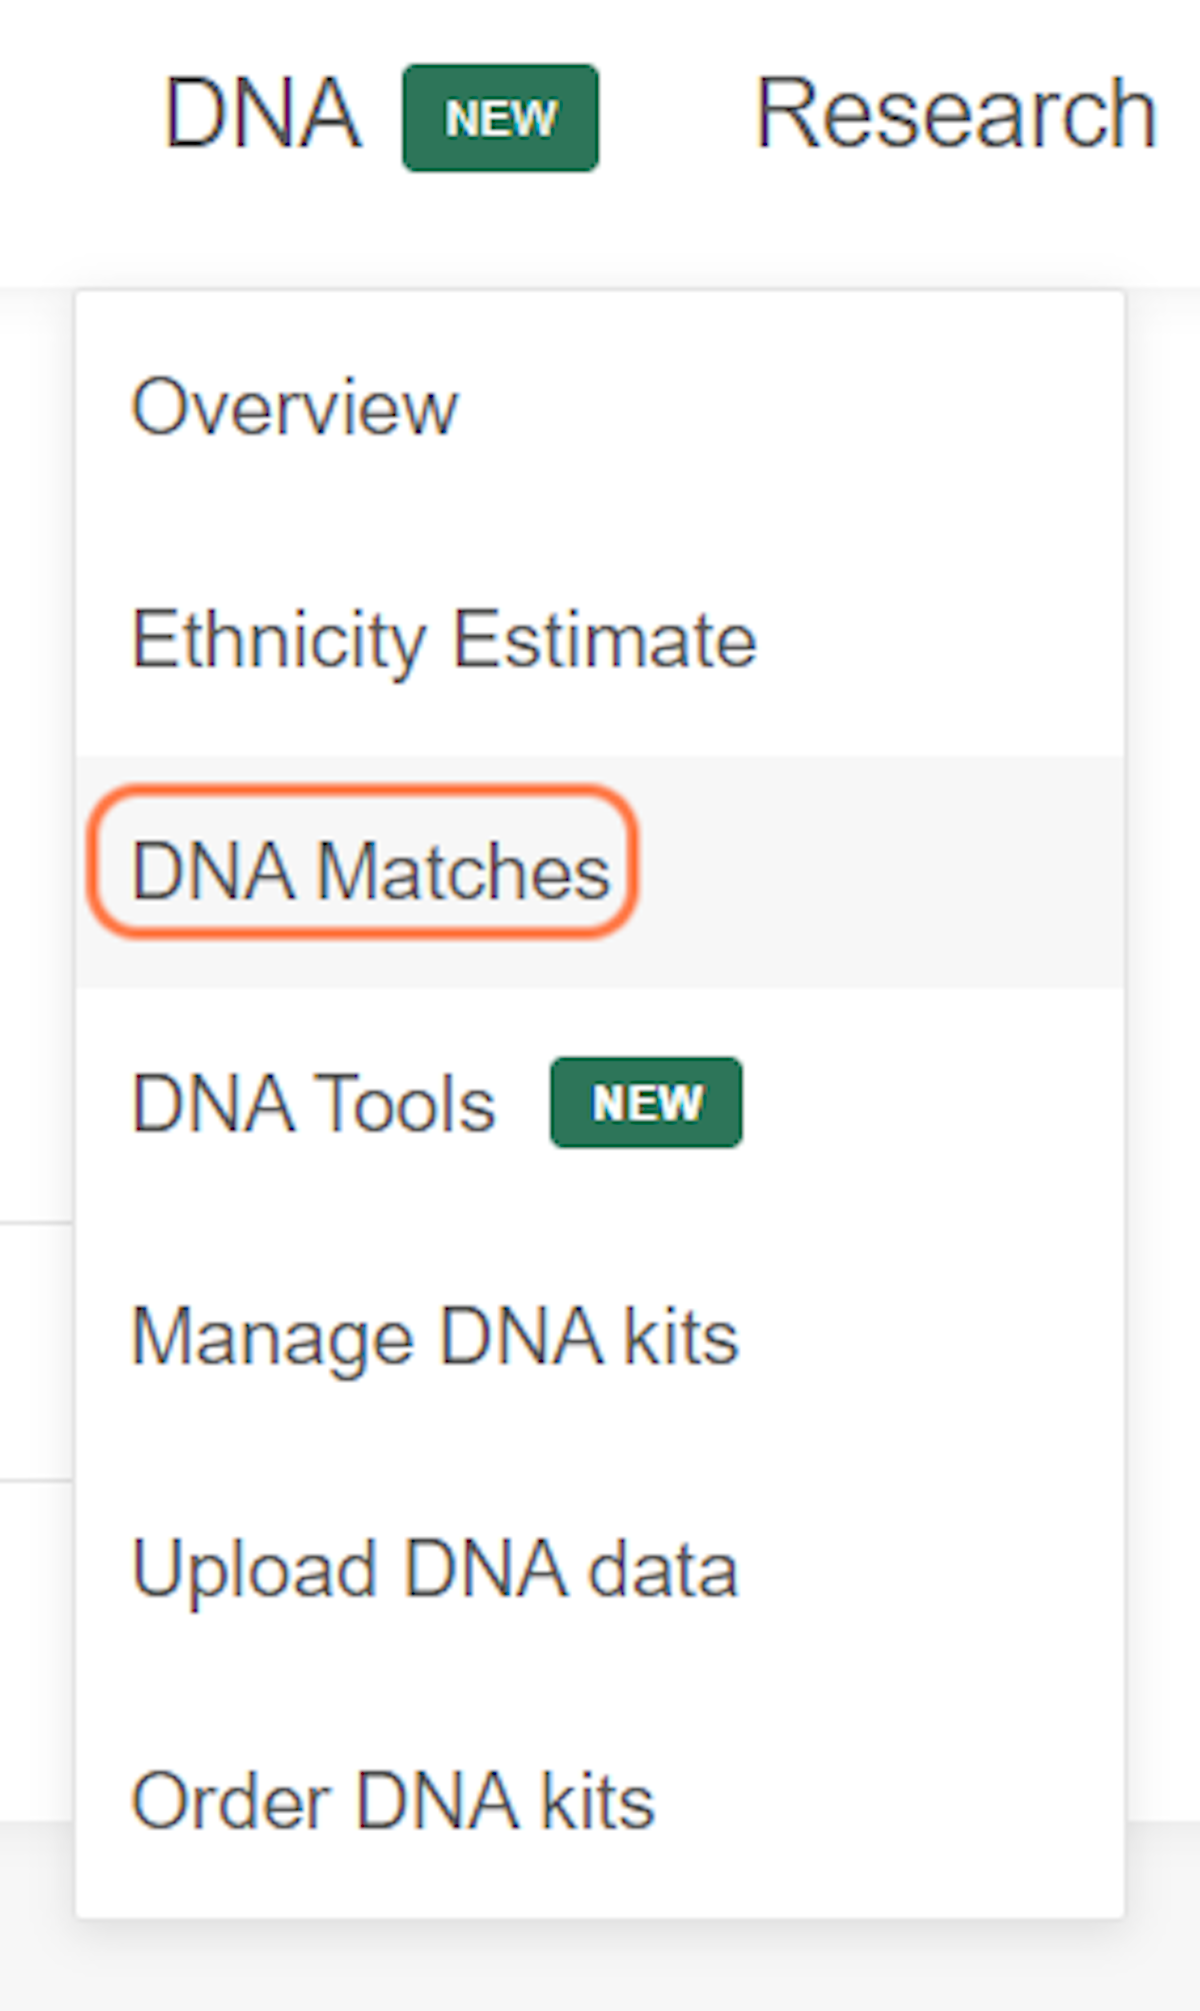 You can also see these new tools from your DNA Matches screen.